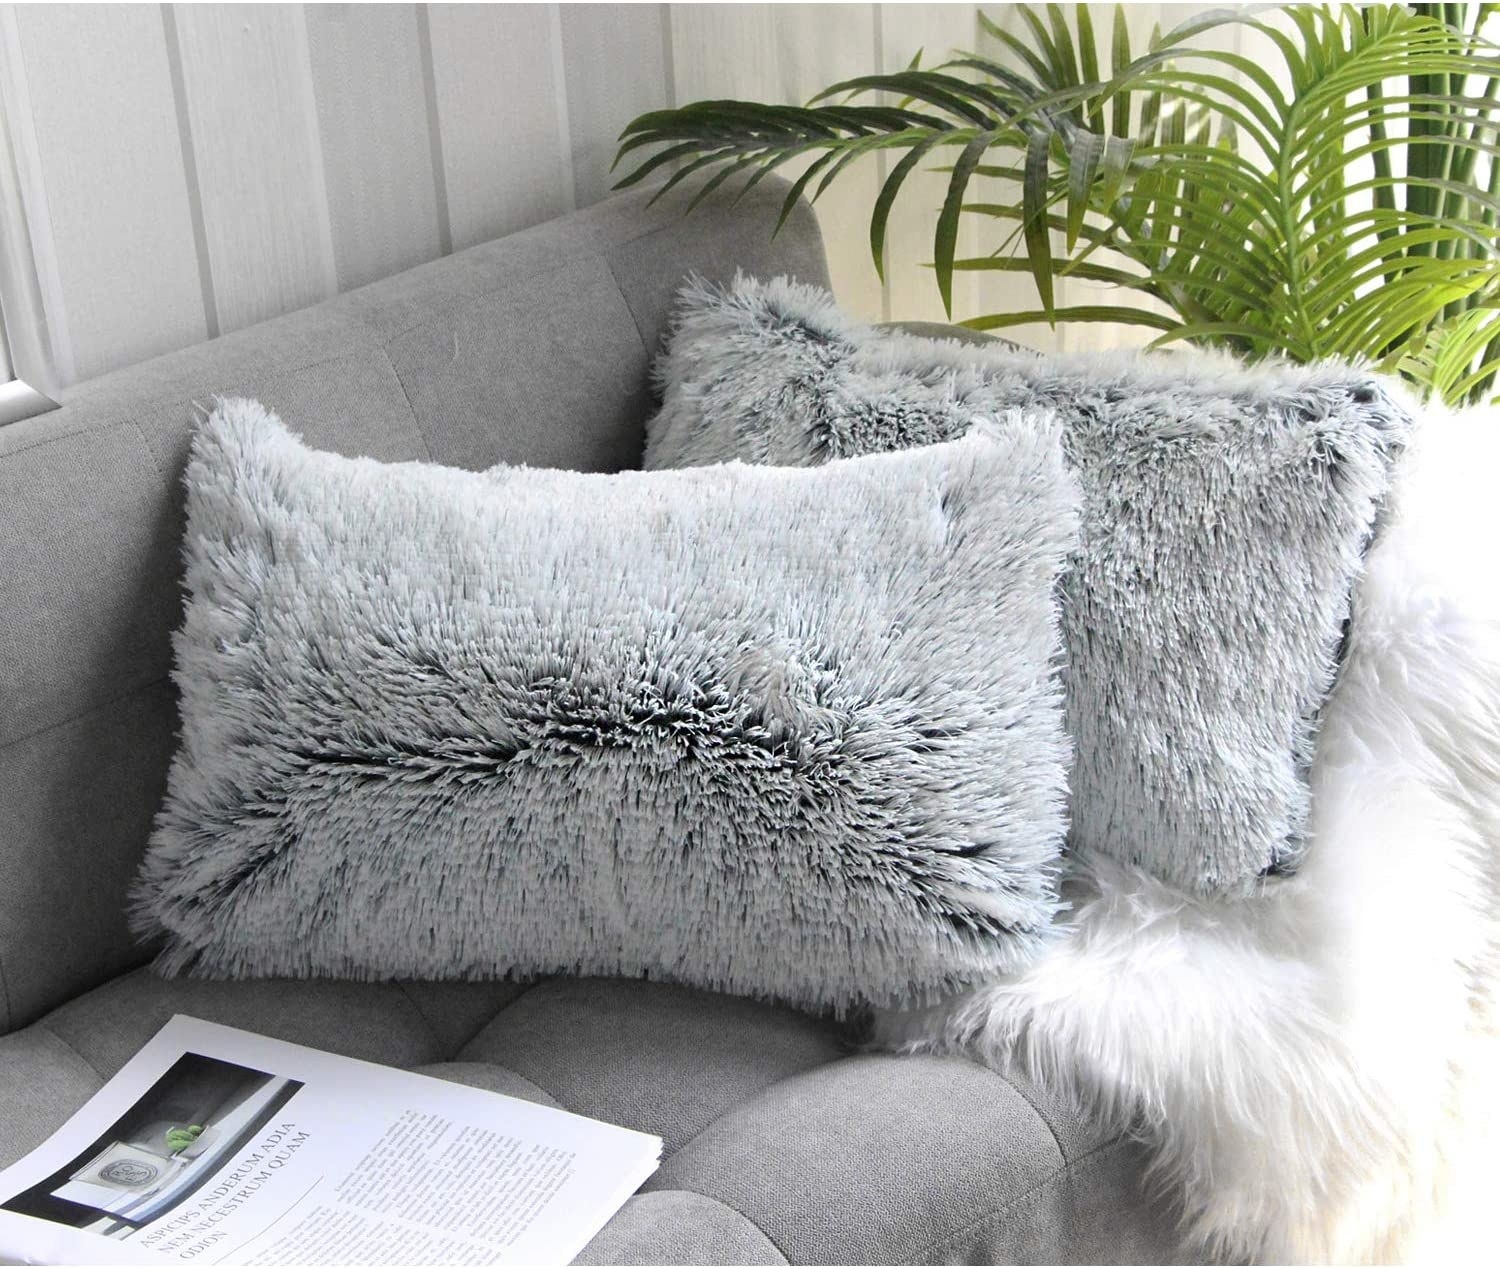 A photo of the gray faux fur pillow covers on rectangular pillows